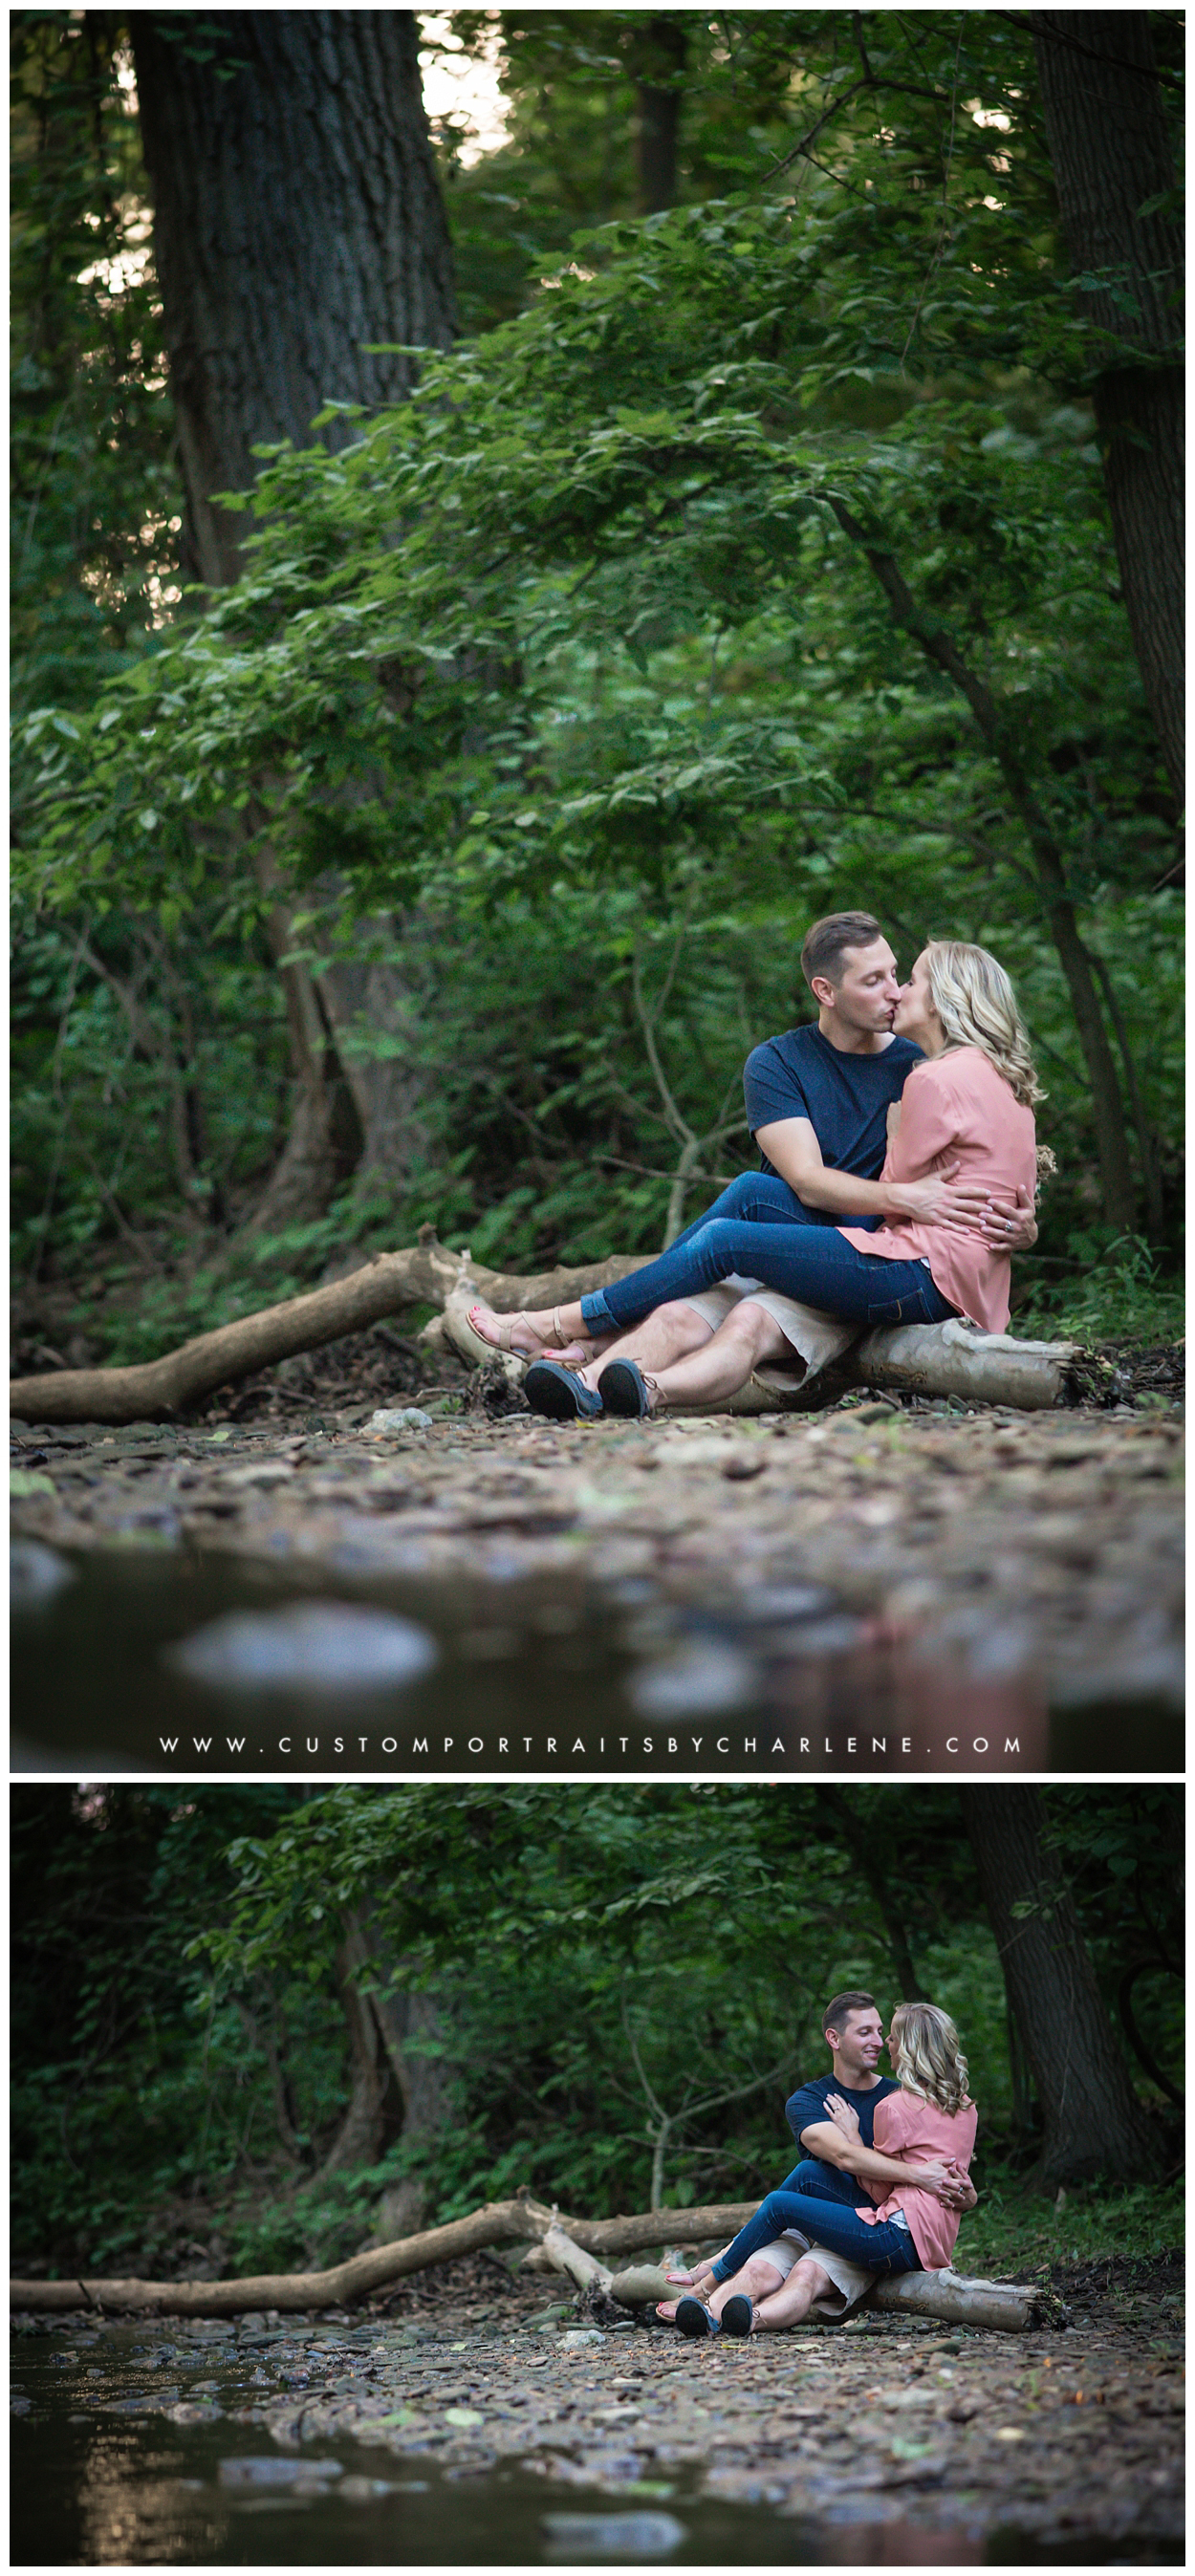 Sewickley Engagement Session - Engagement Picture Ideas - Pittsburgh Wedding Photography - Urban Rural Park Engaged14